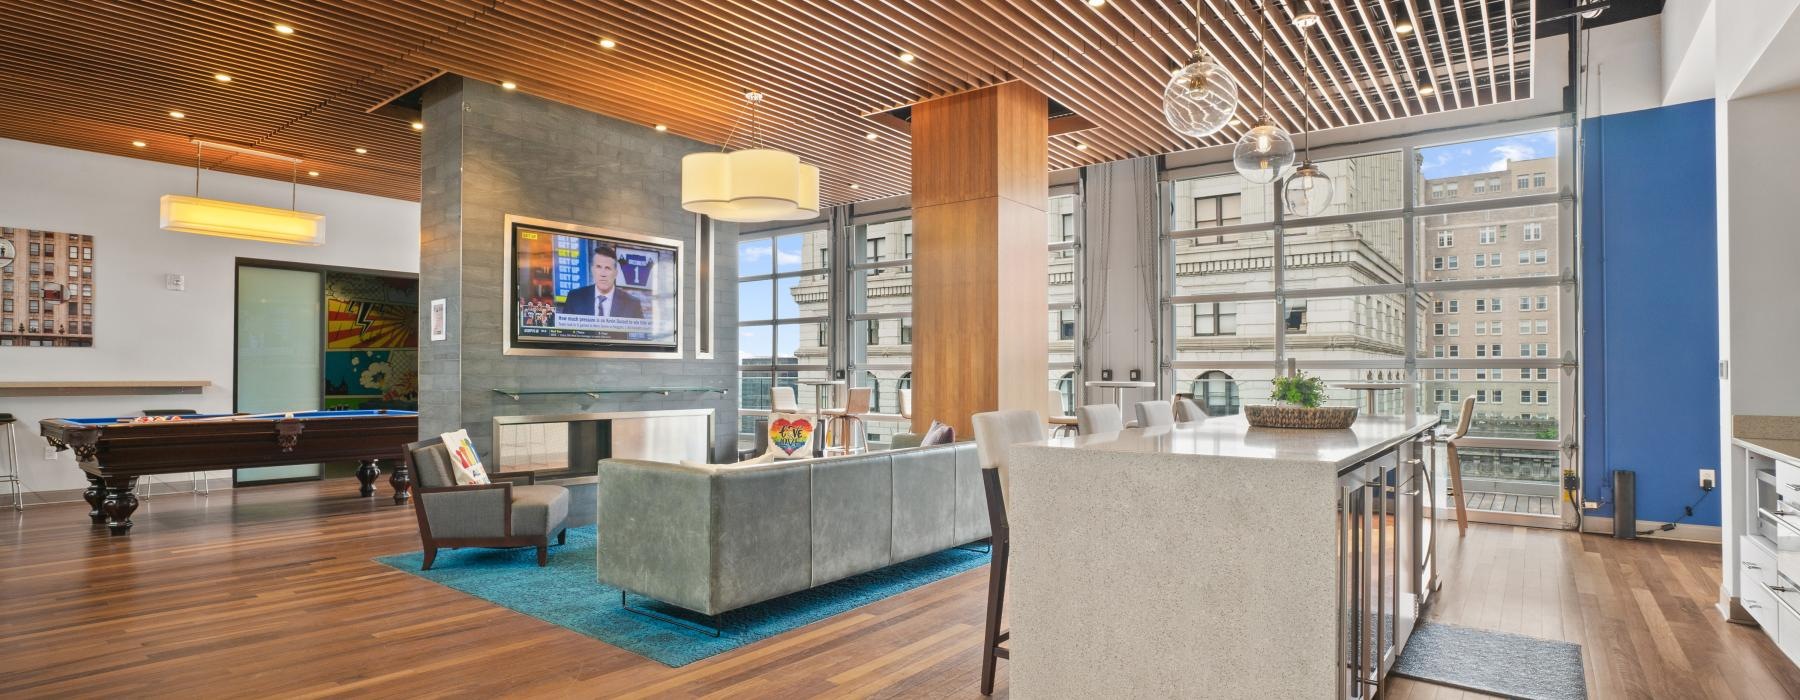 spacious lounge with wooden accents, a kitchen area and other connected amenities